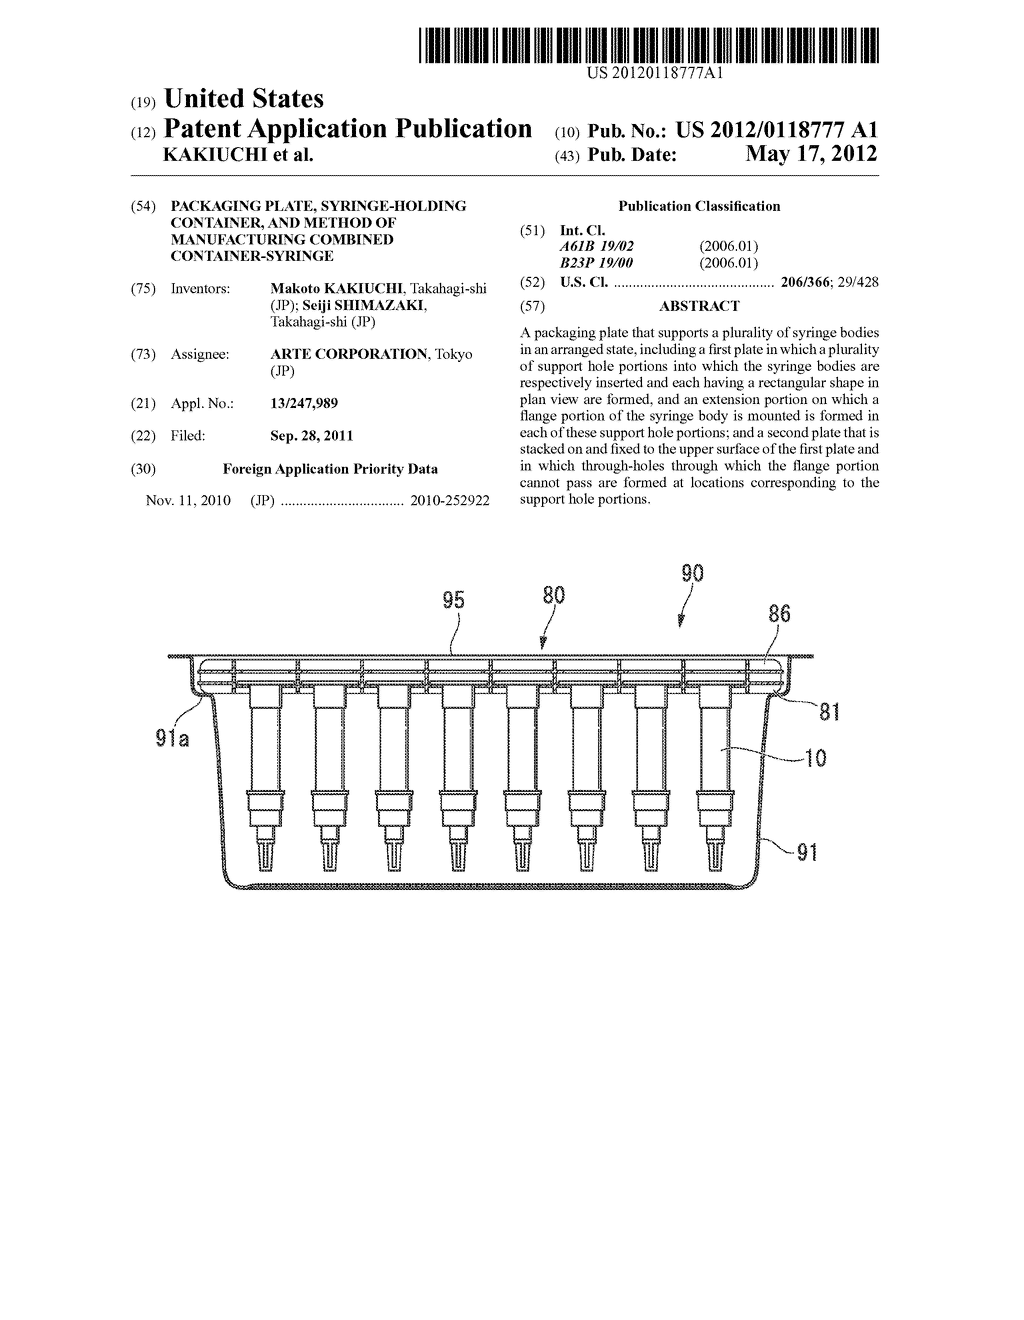 Packaging Plate, Syringe-Holding Container, and Method of Manufacturing     Combined Container-Syringe - diagram, schematic, and image 01